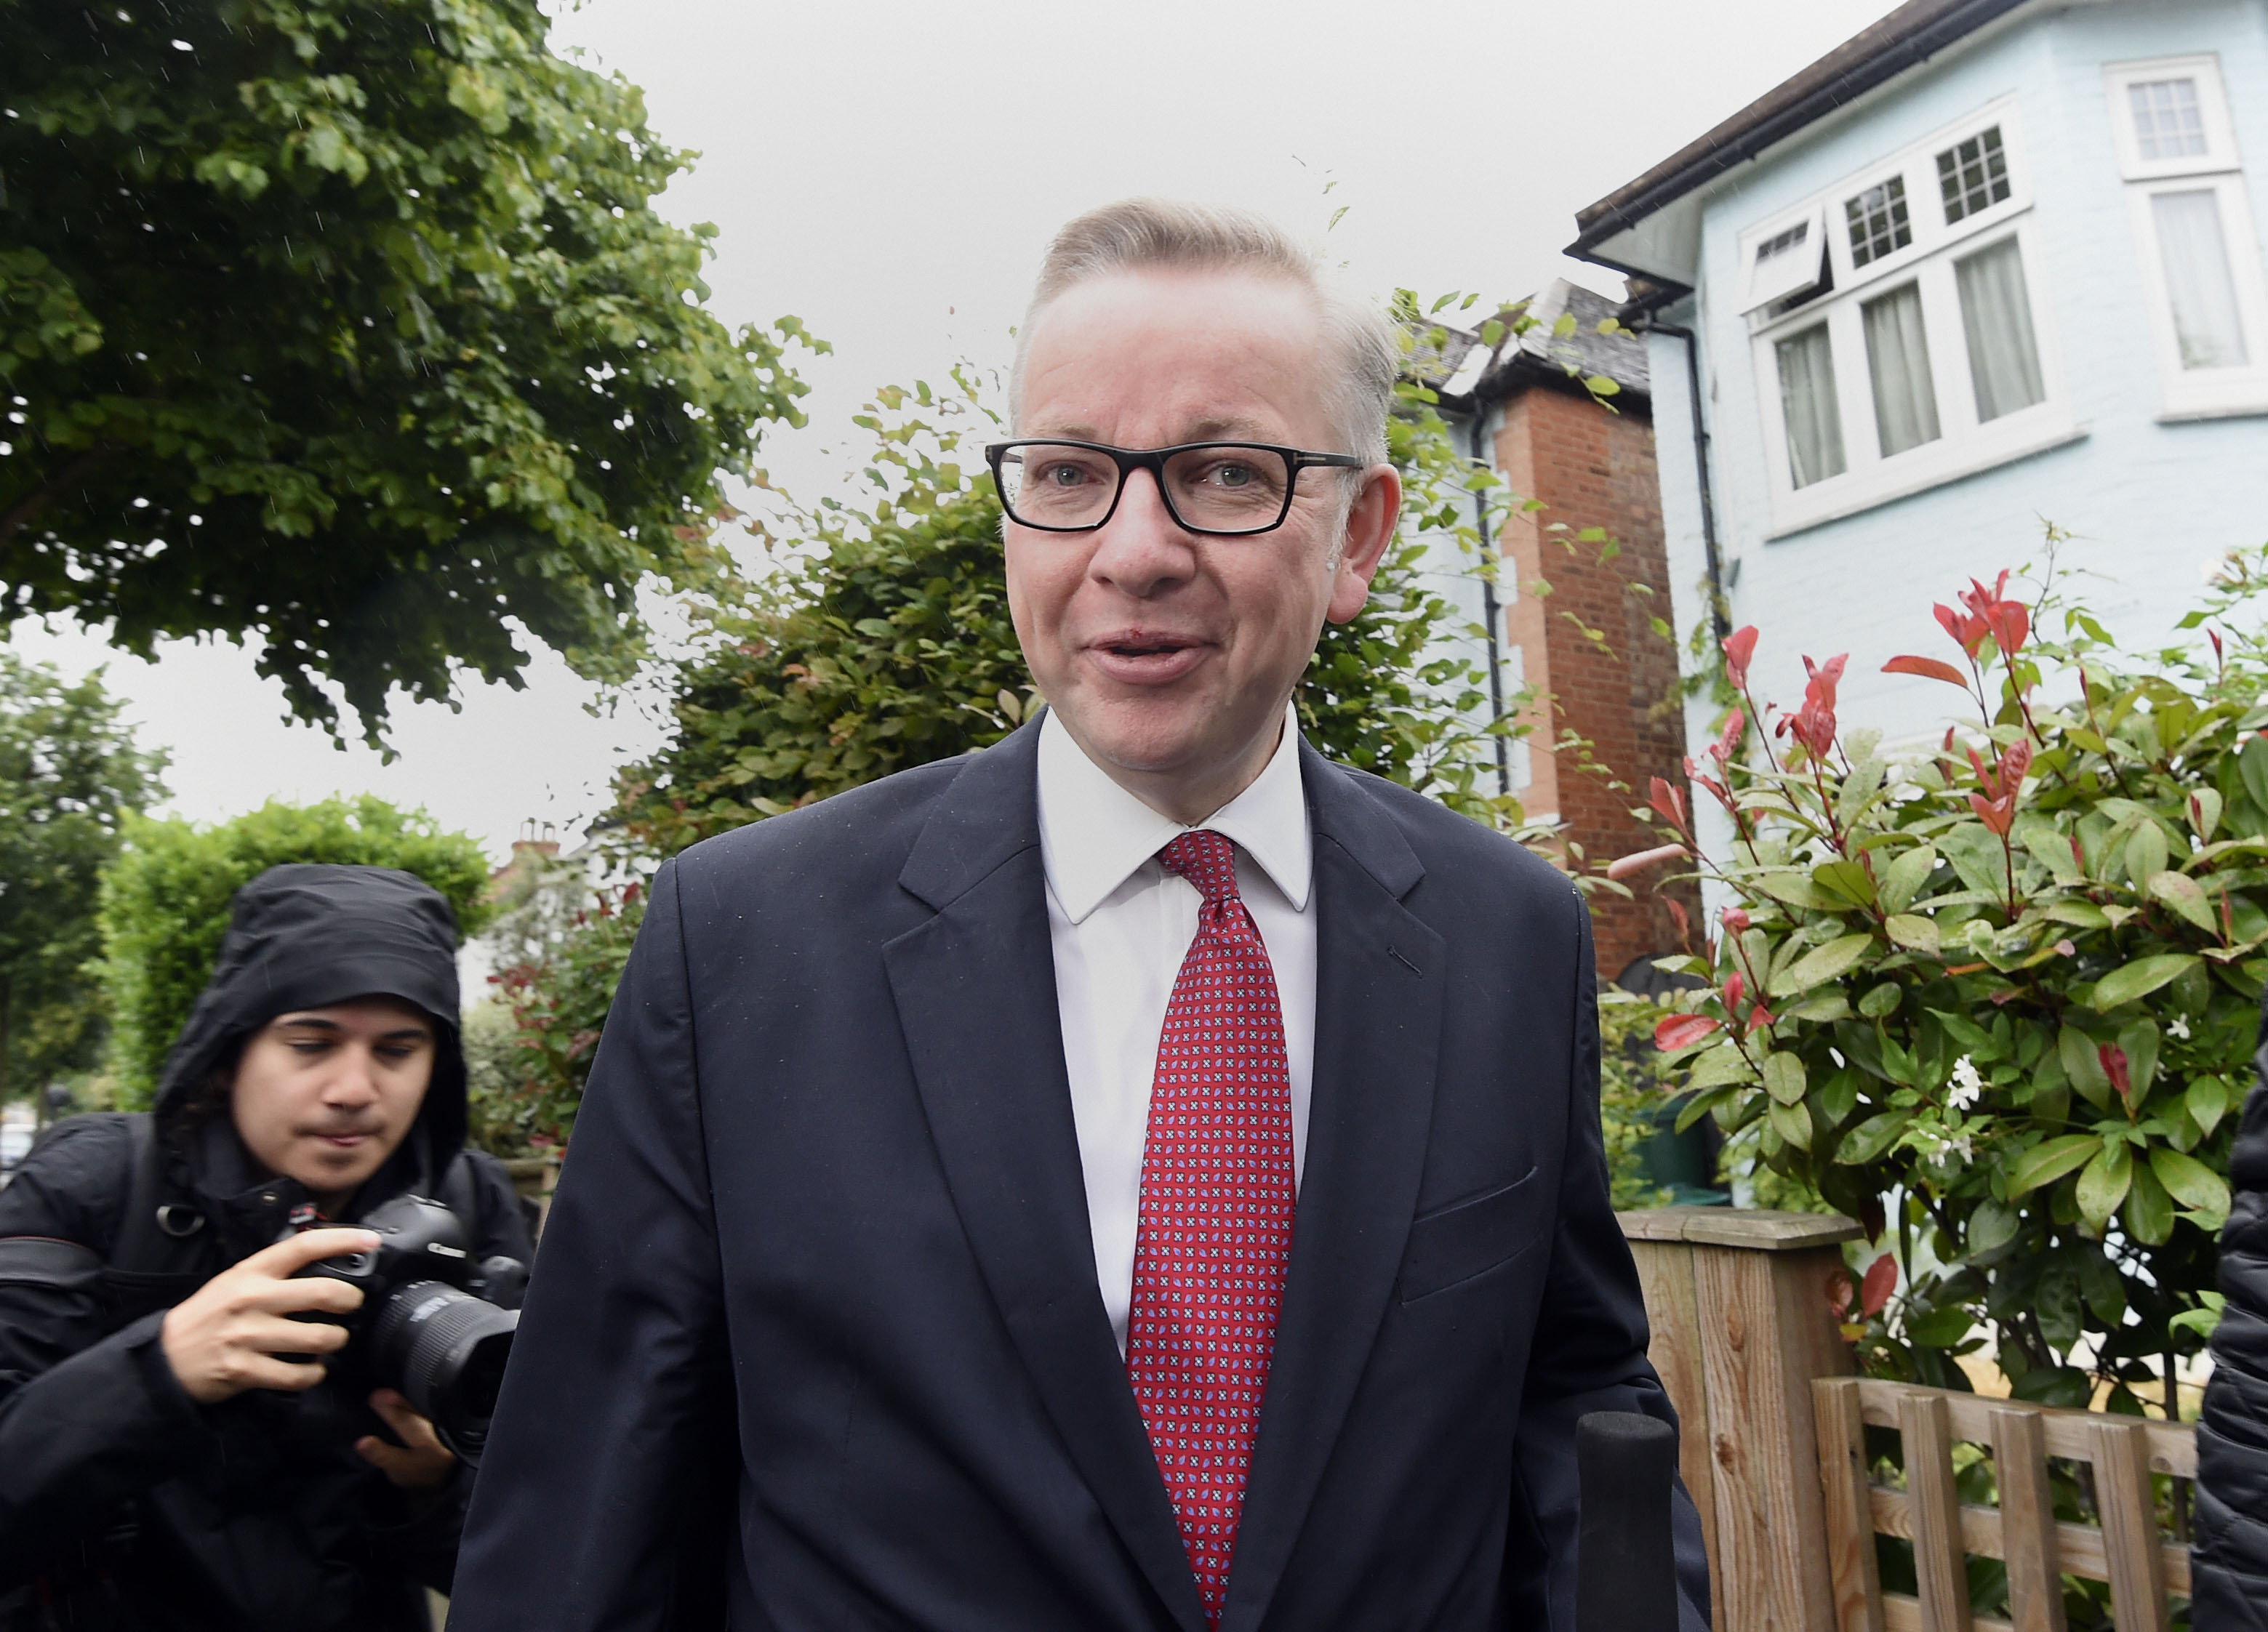 Michael Gove being met by press as he leaves his home